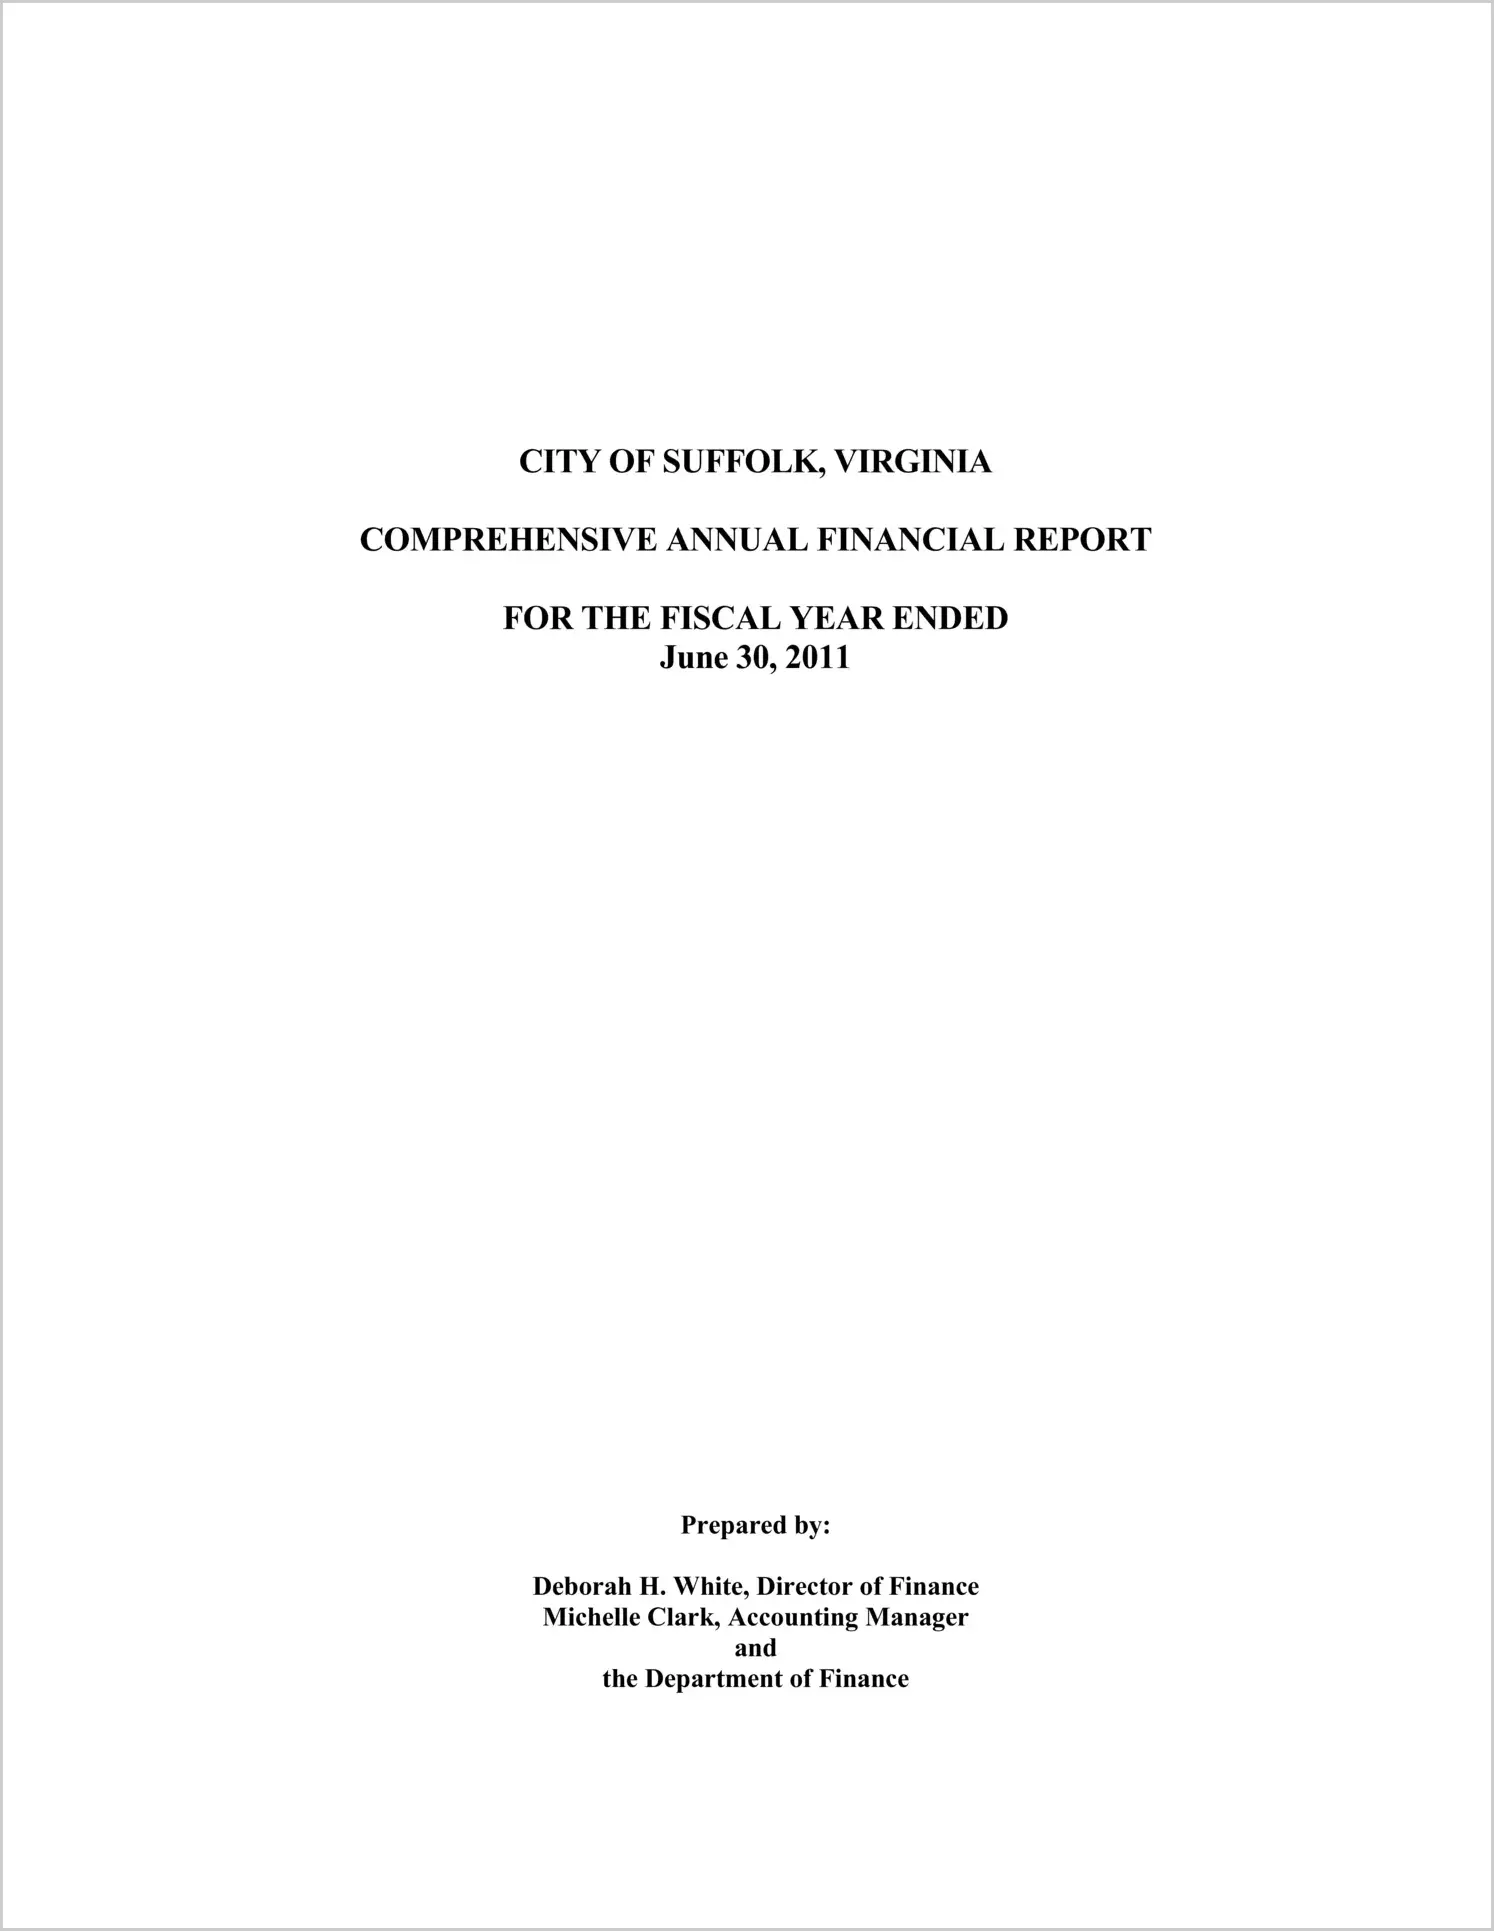 2011 Annual Financial Report for City of Suffolk